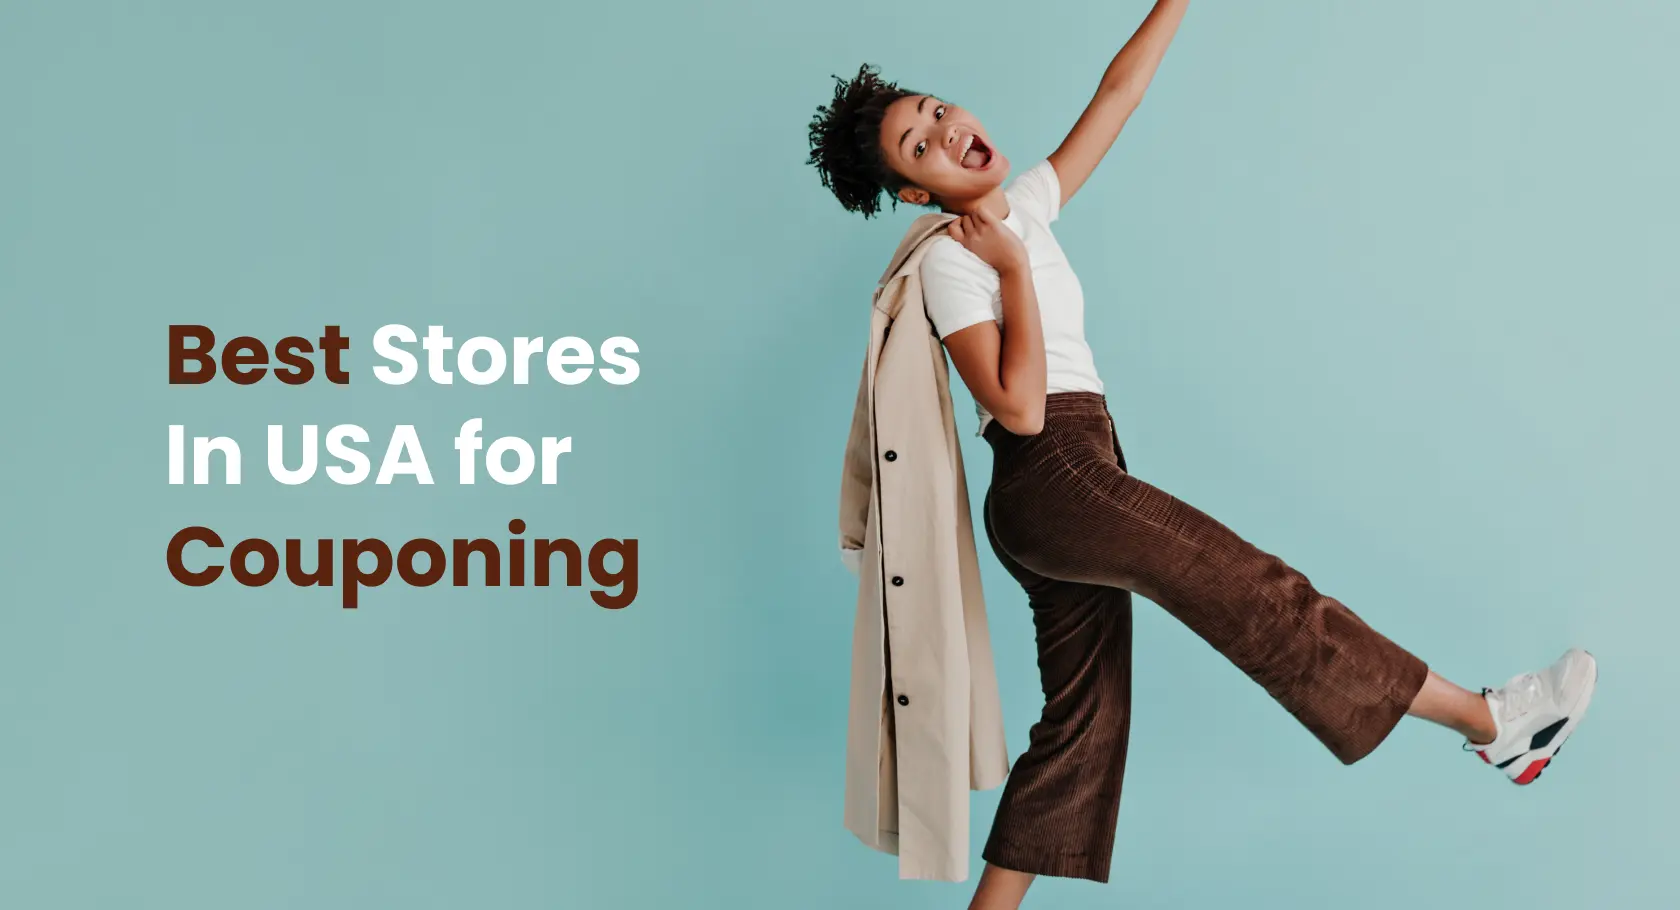 Best Stores for Couponing in USA